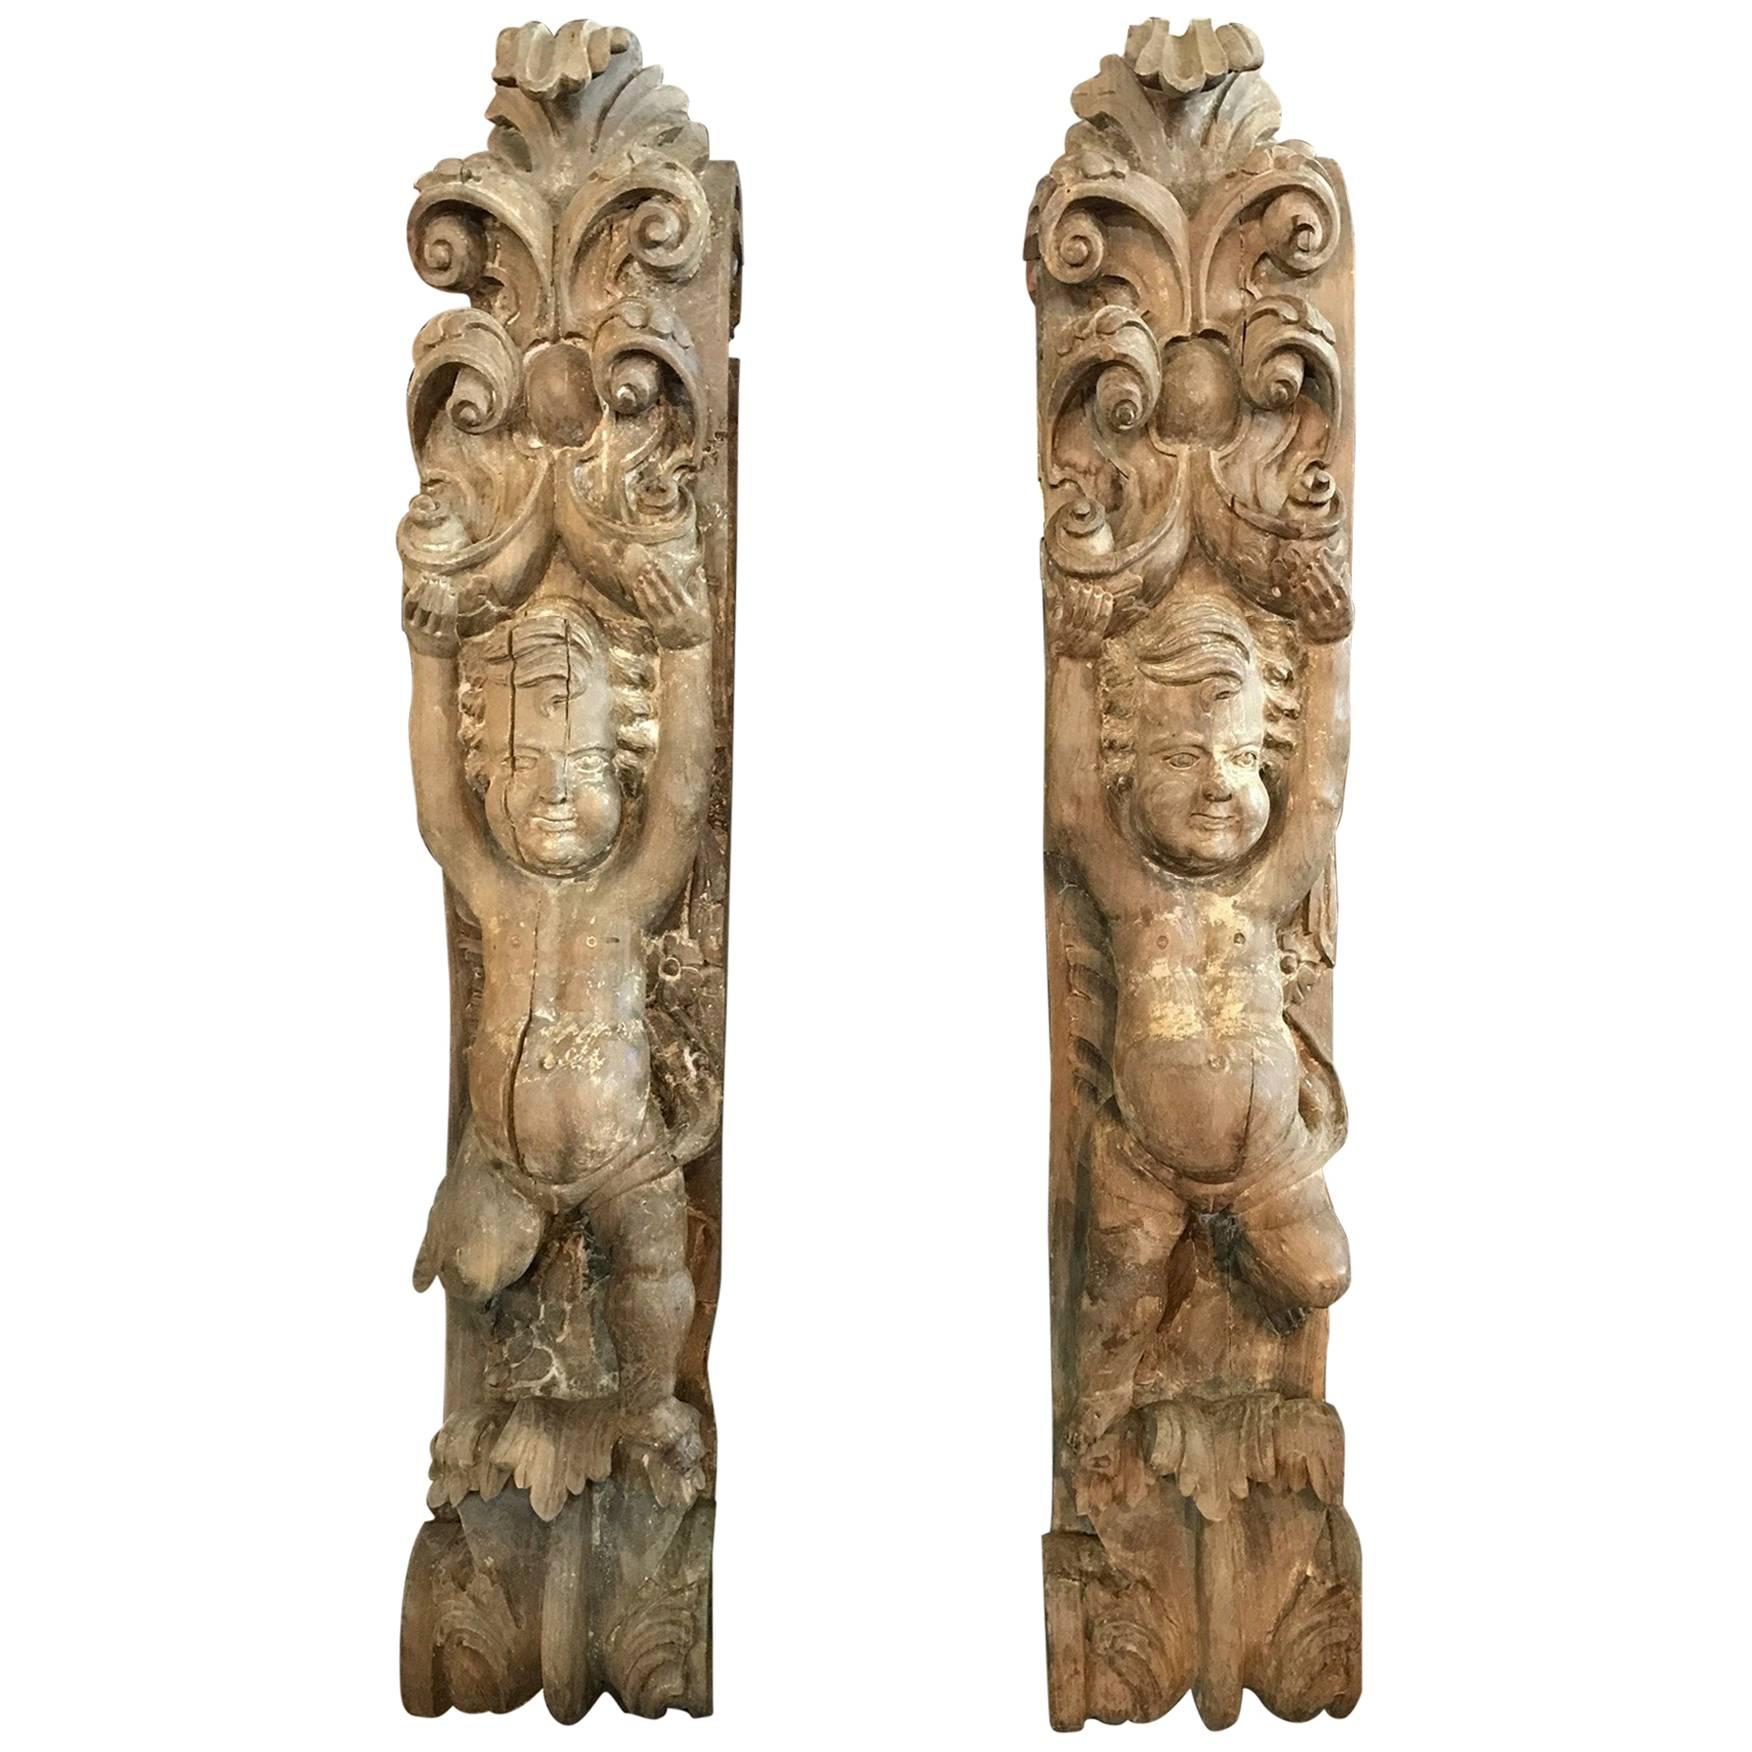 Exquisite Pair of Early French 17th Century Corbels